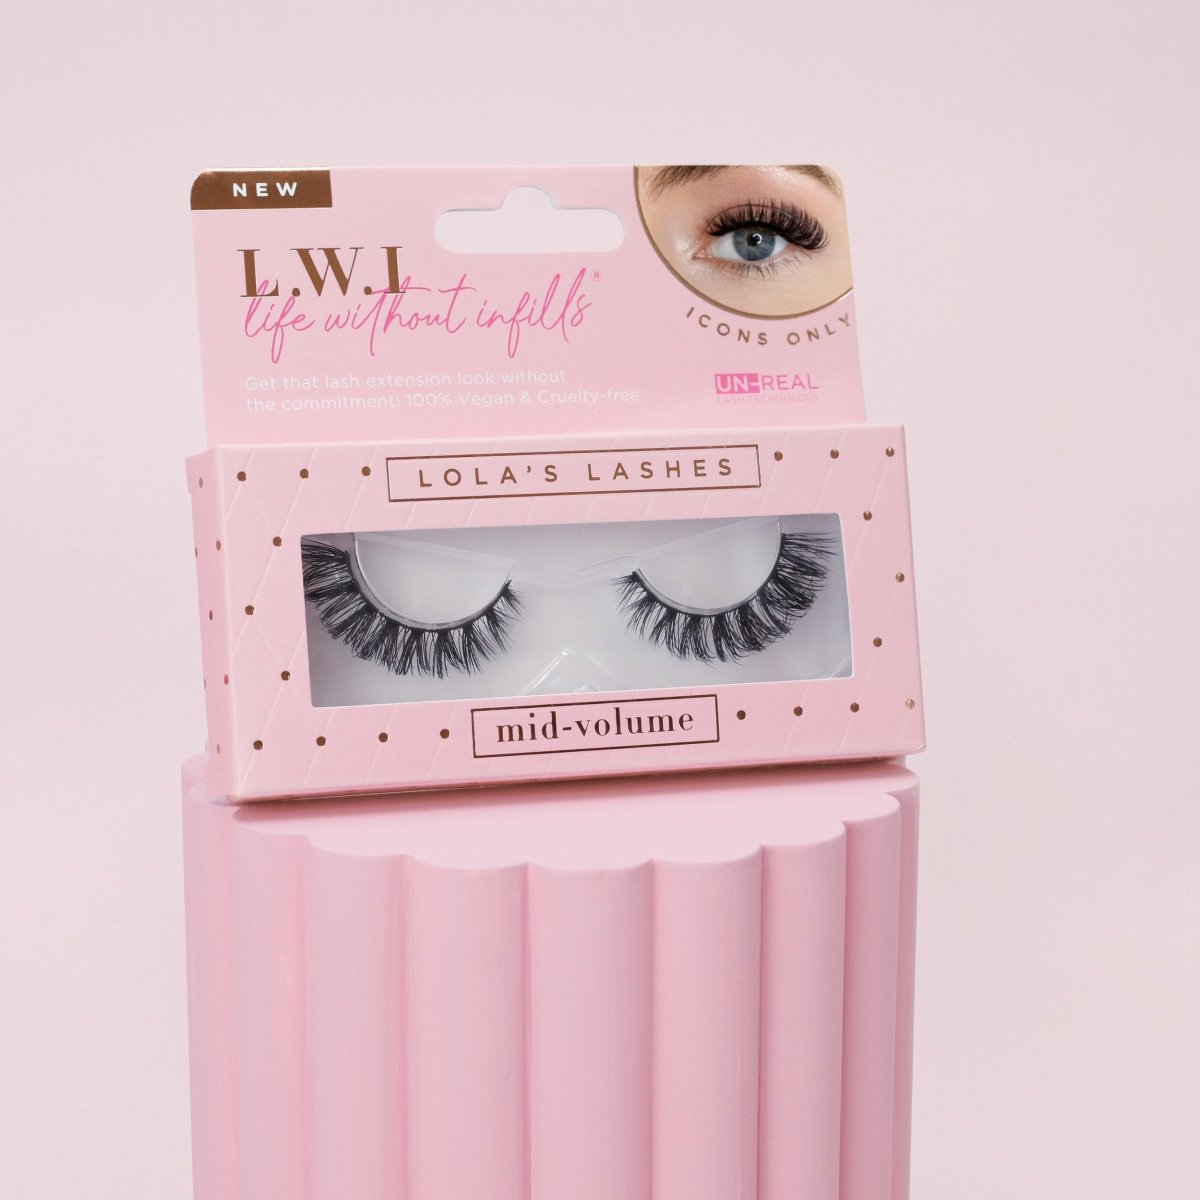 L.W.I Icons Only Russian Strip Lashes - Lola's Lashes